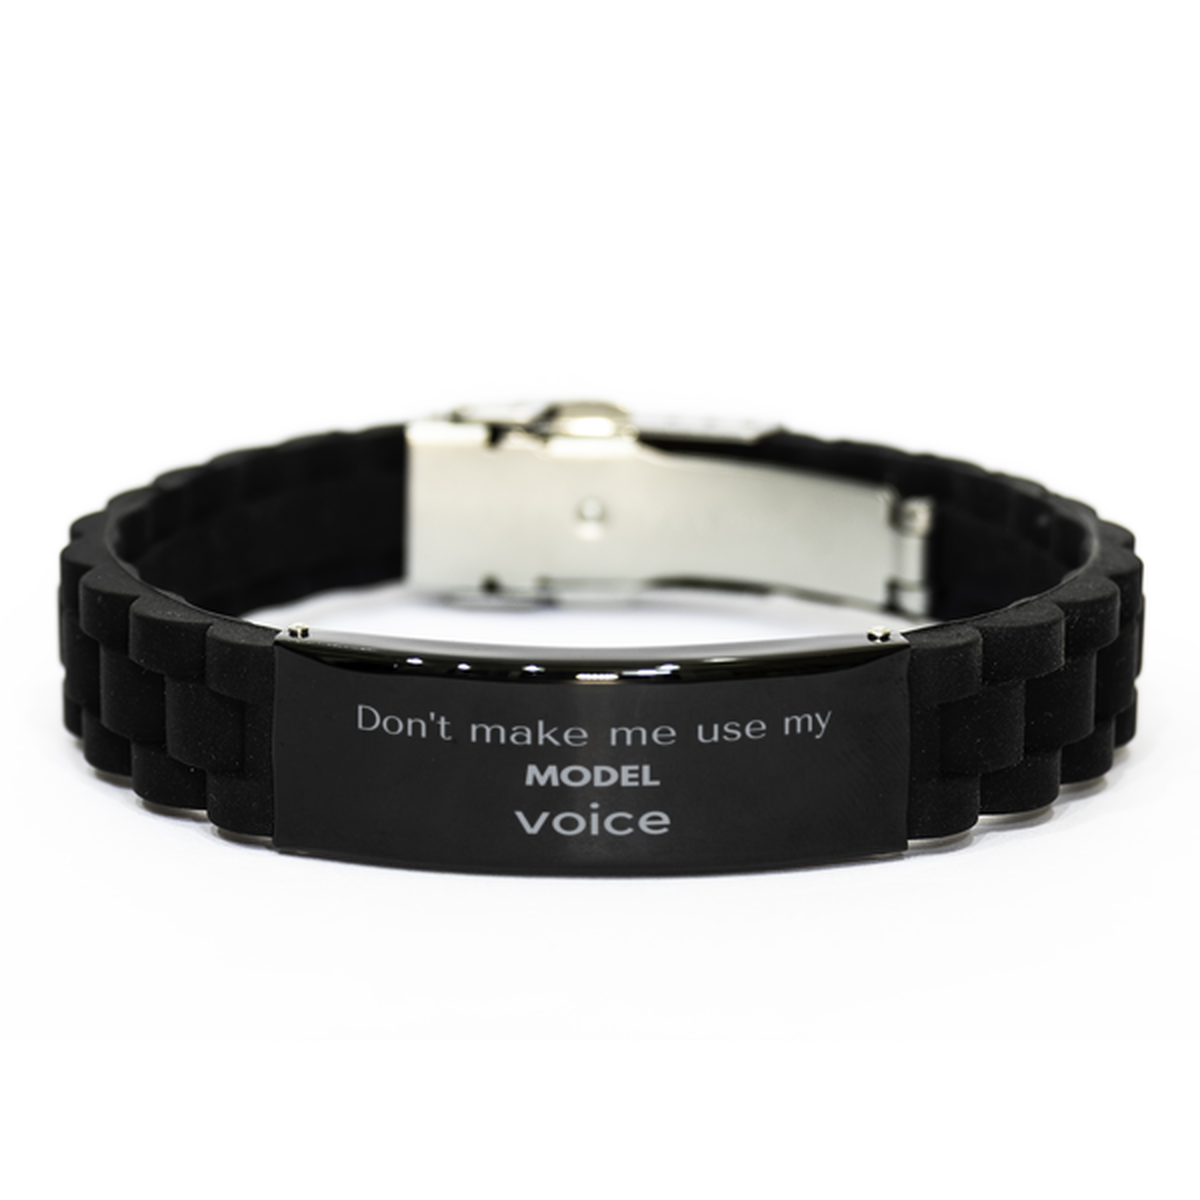 Don't make me use my Model voice, Sarcasm Model Gifts, Christmas Model Black Glidelock Clasp Bracelet Birthday Unique Gifts For Model Coworkers, Men, Women, Colleague, Friends